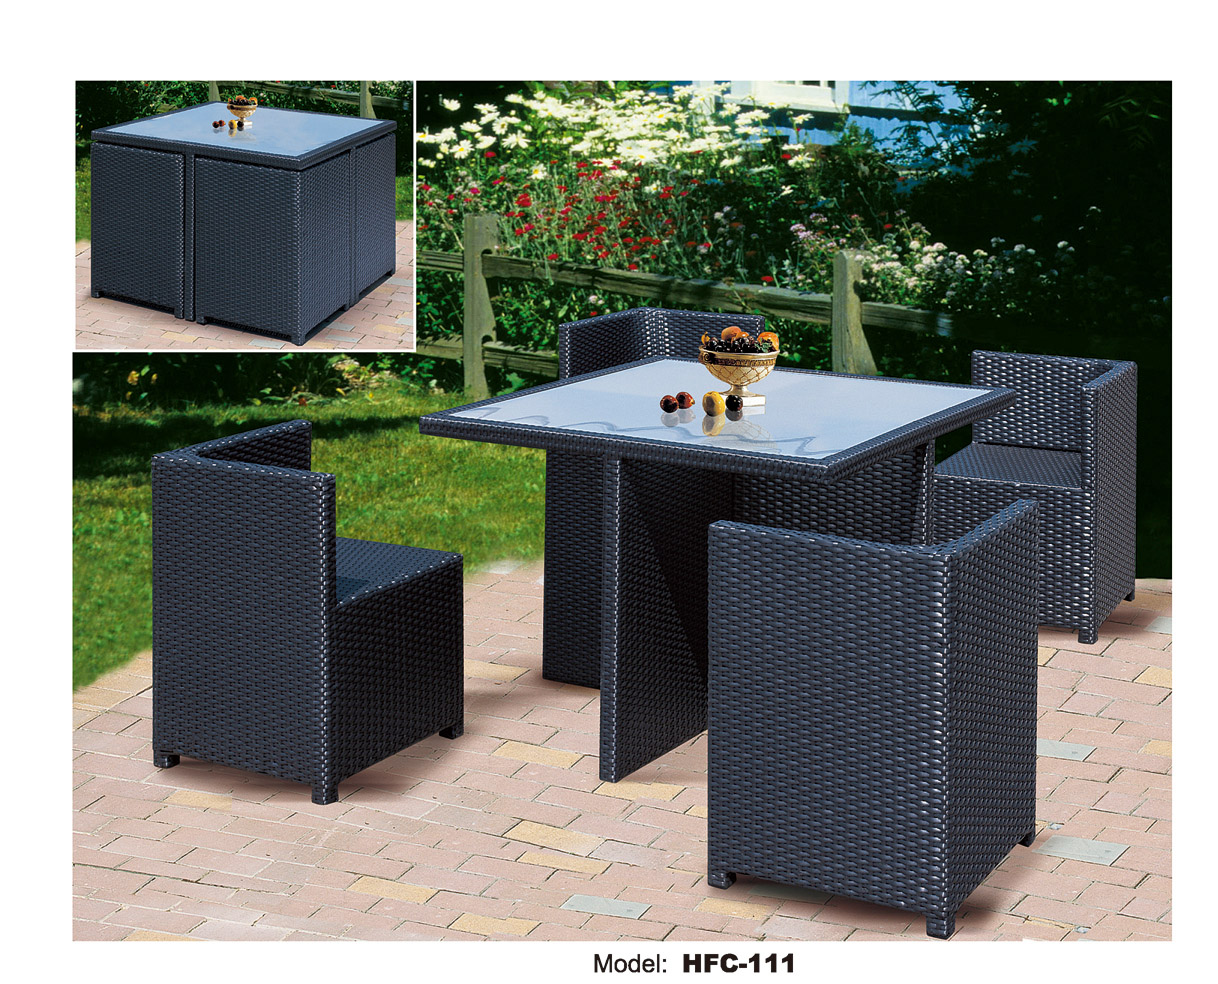 TG-HFC111 Outdoor Rattan Cube Chair Dining Set with Square Table for Garden